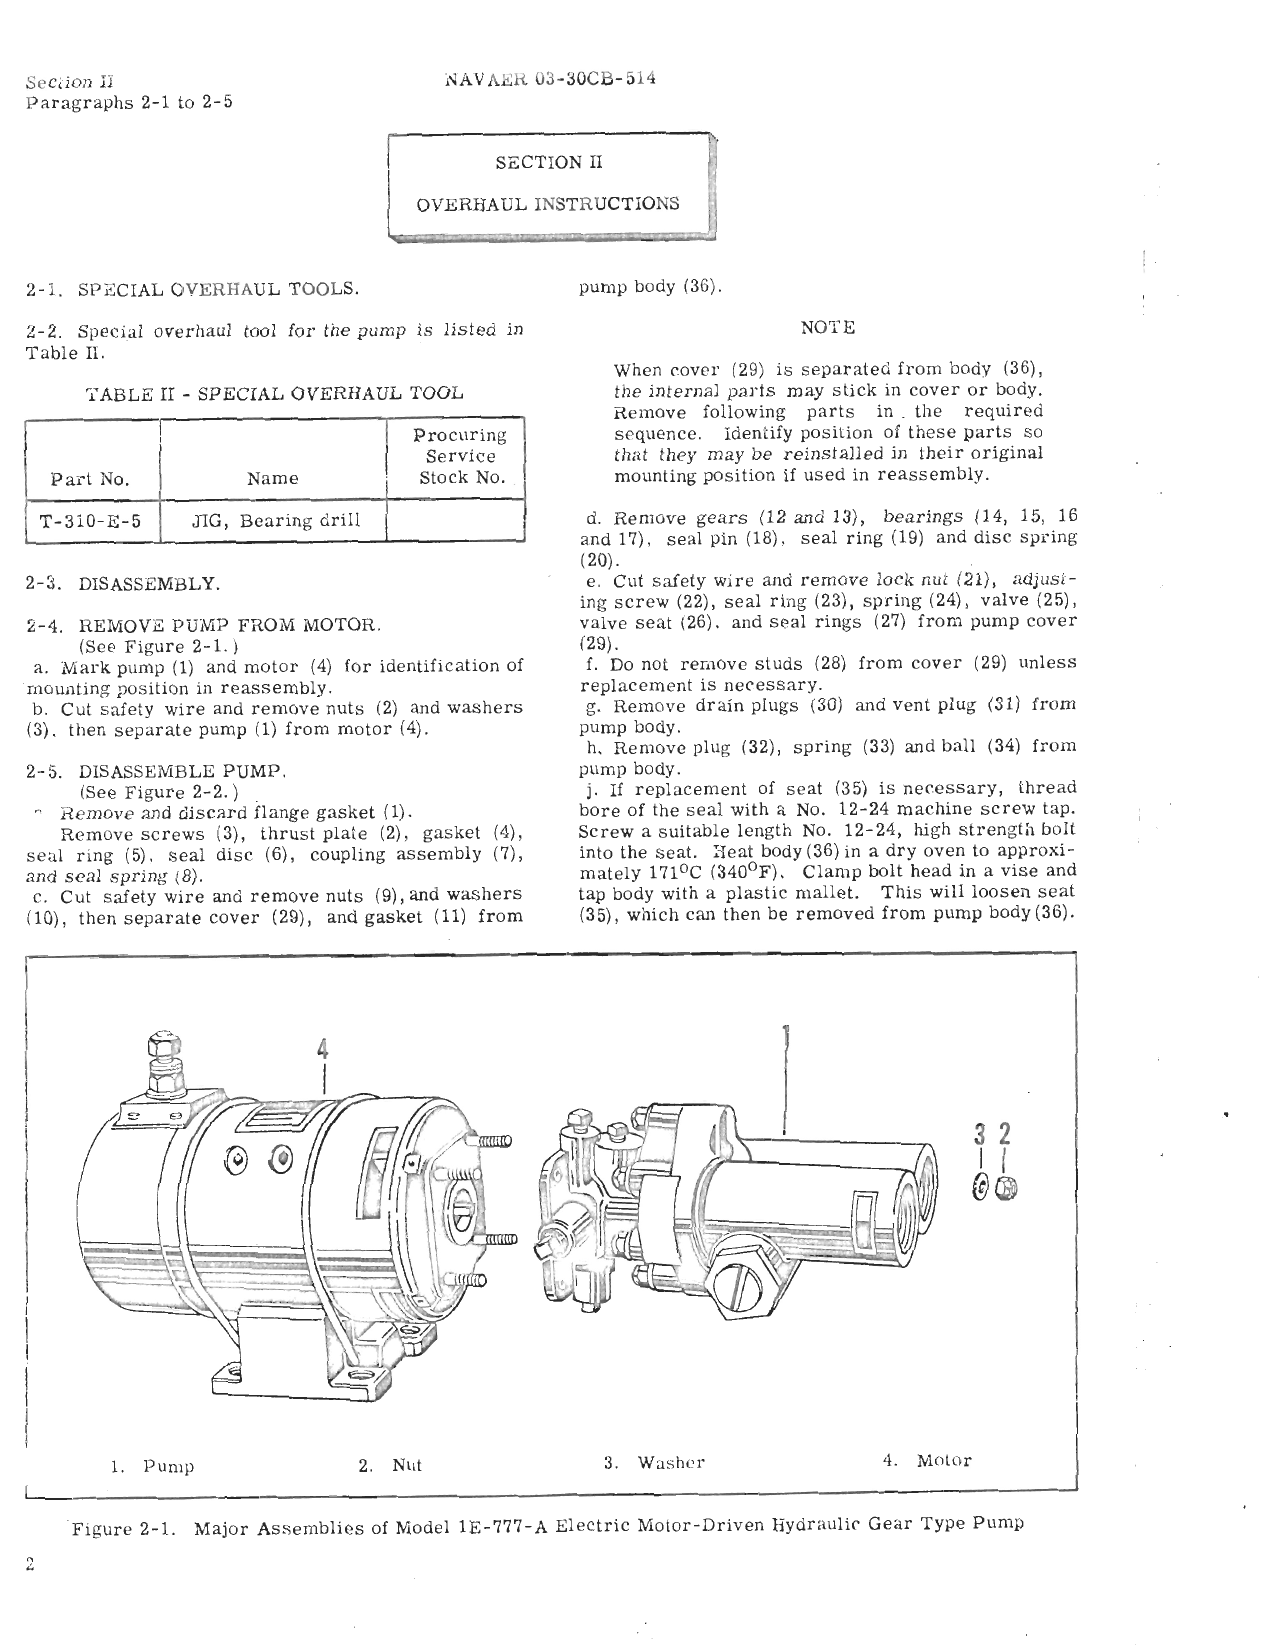 Sample page 5 from AirCorps Library document: Overhaul Instructions for Electric Motor Driven Hydraulic Gear Type Pump - Model 1E-777 Series